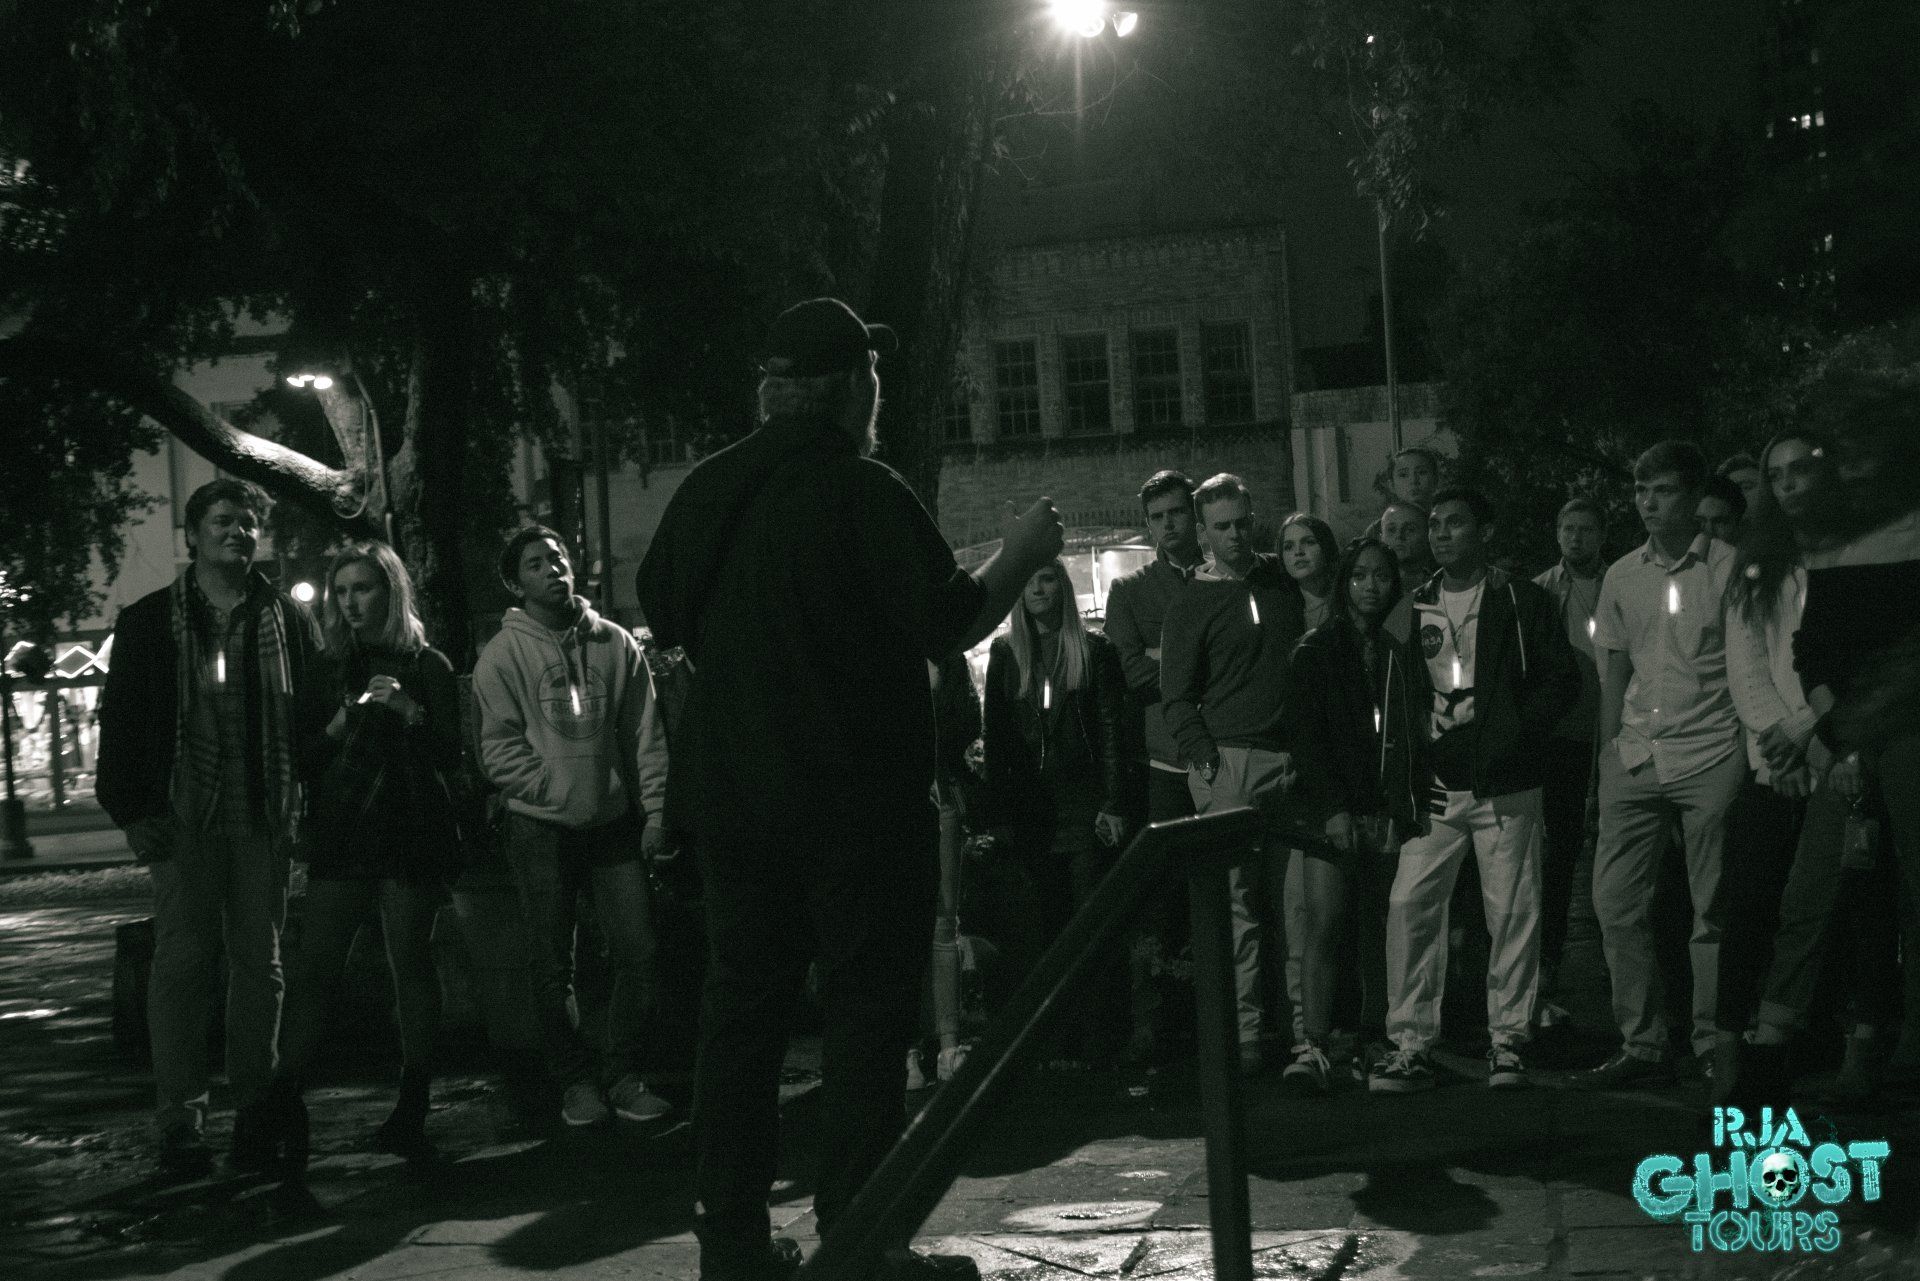 An image of a RJA Ghost Tours ghost tour in San Antonio.